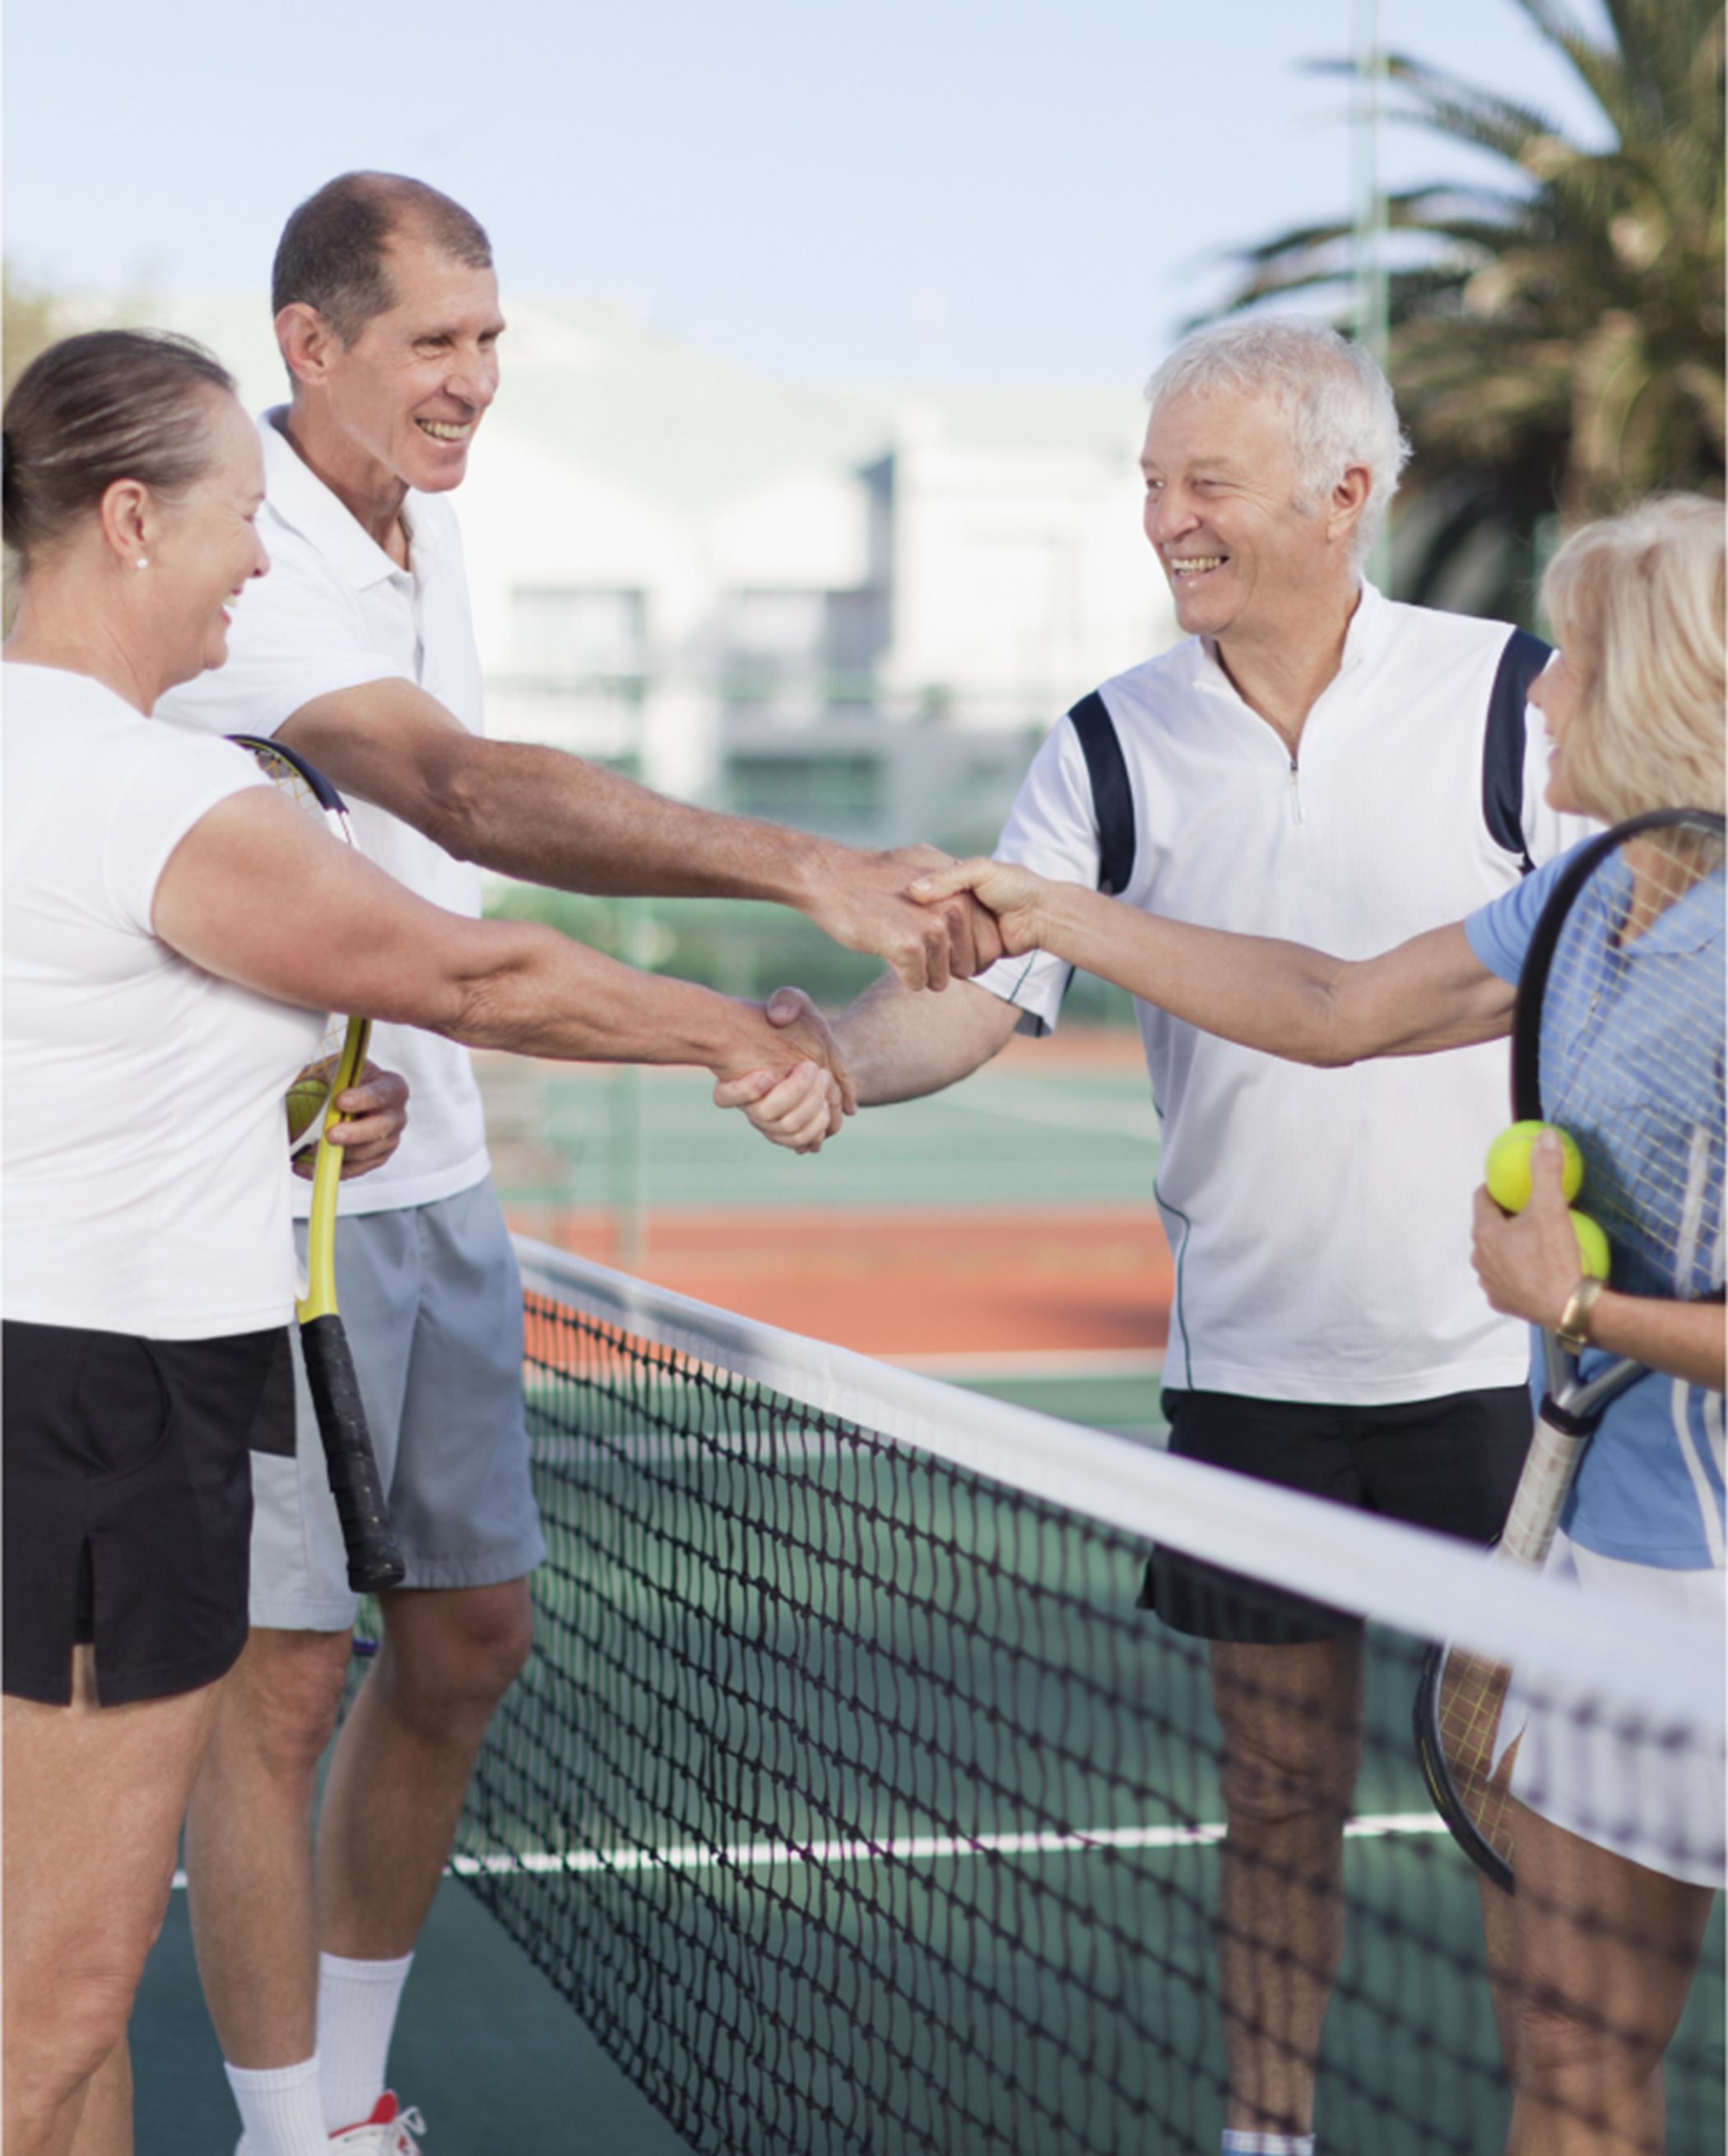 A group shaking hands on a tennis court